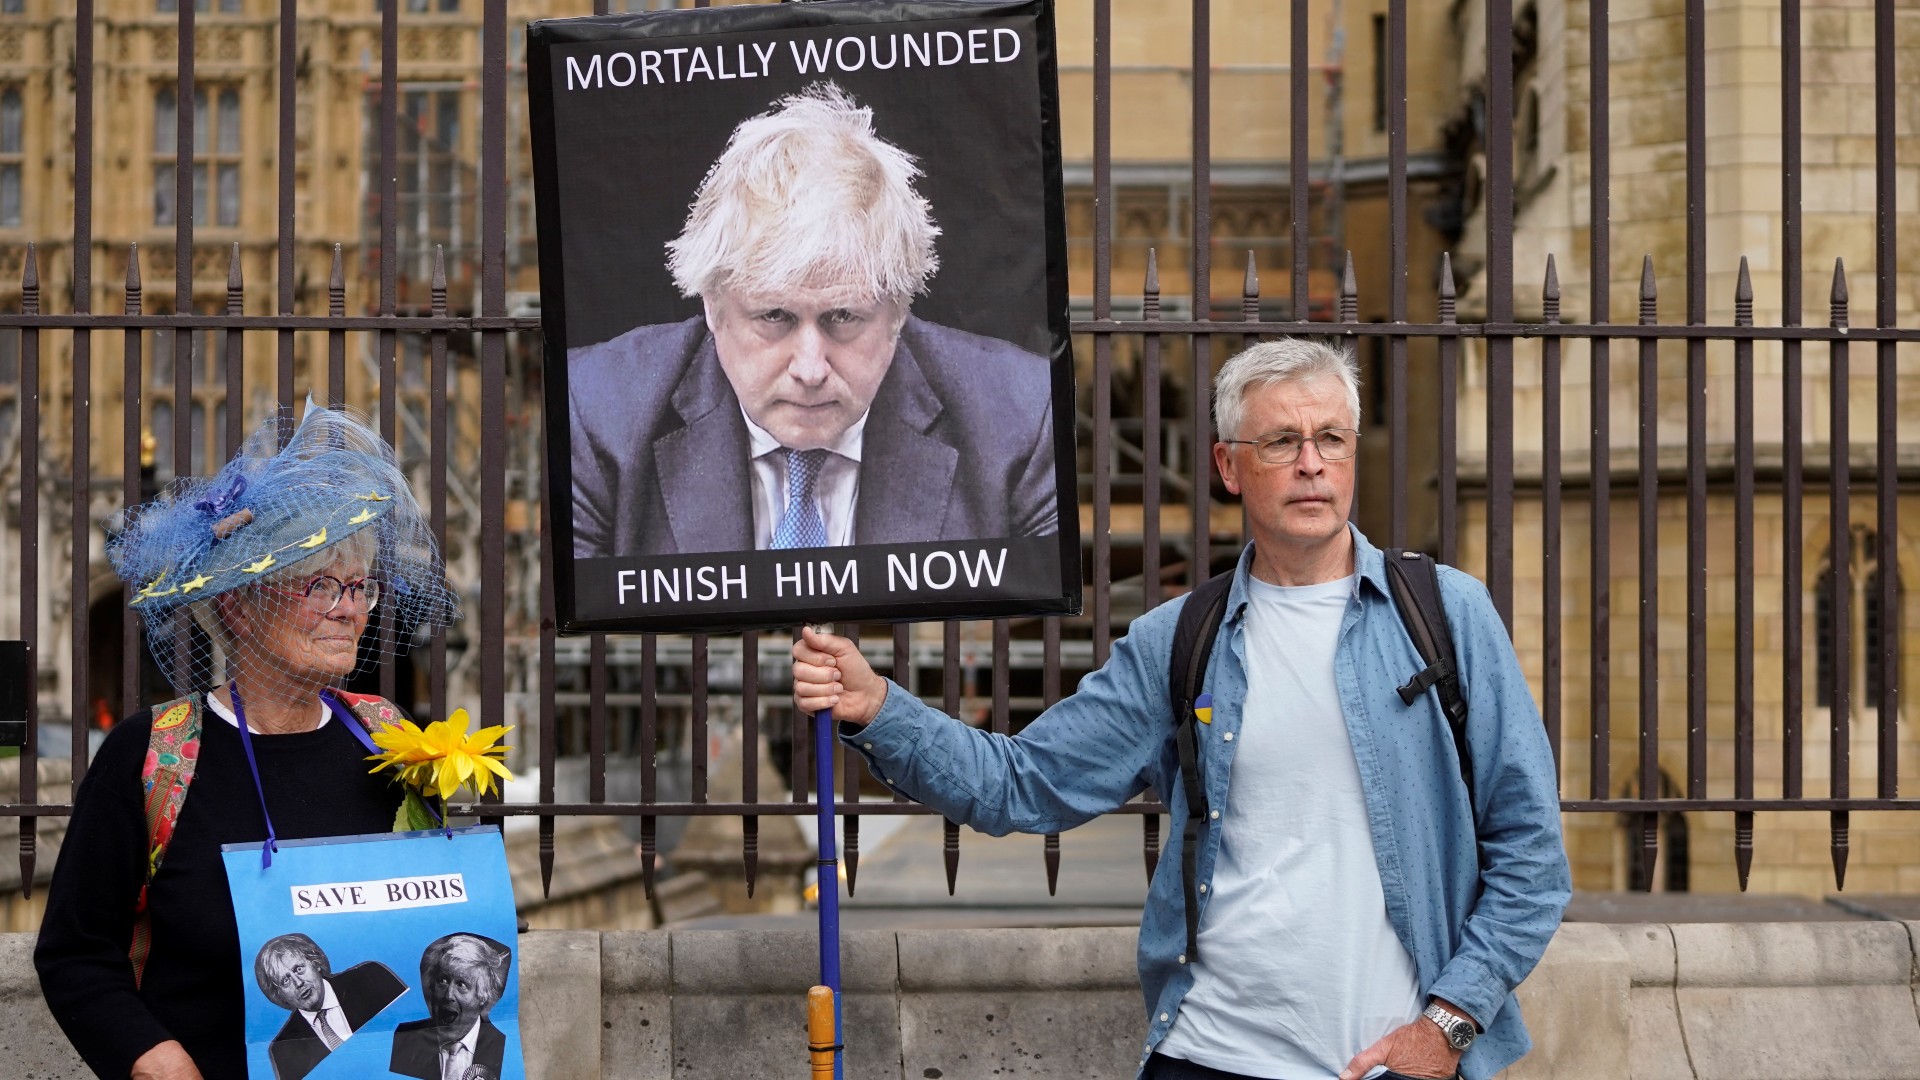 Demonstrators hold placards picturing Britain's Prime Minister Boris Johnson in front of The House of Parliament, in London, on June 6, 2022 